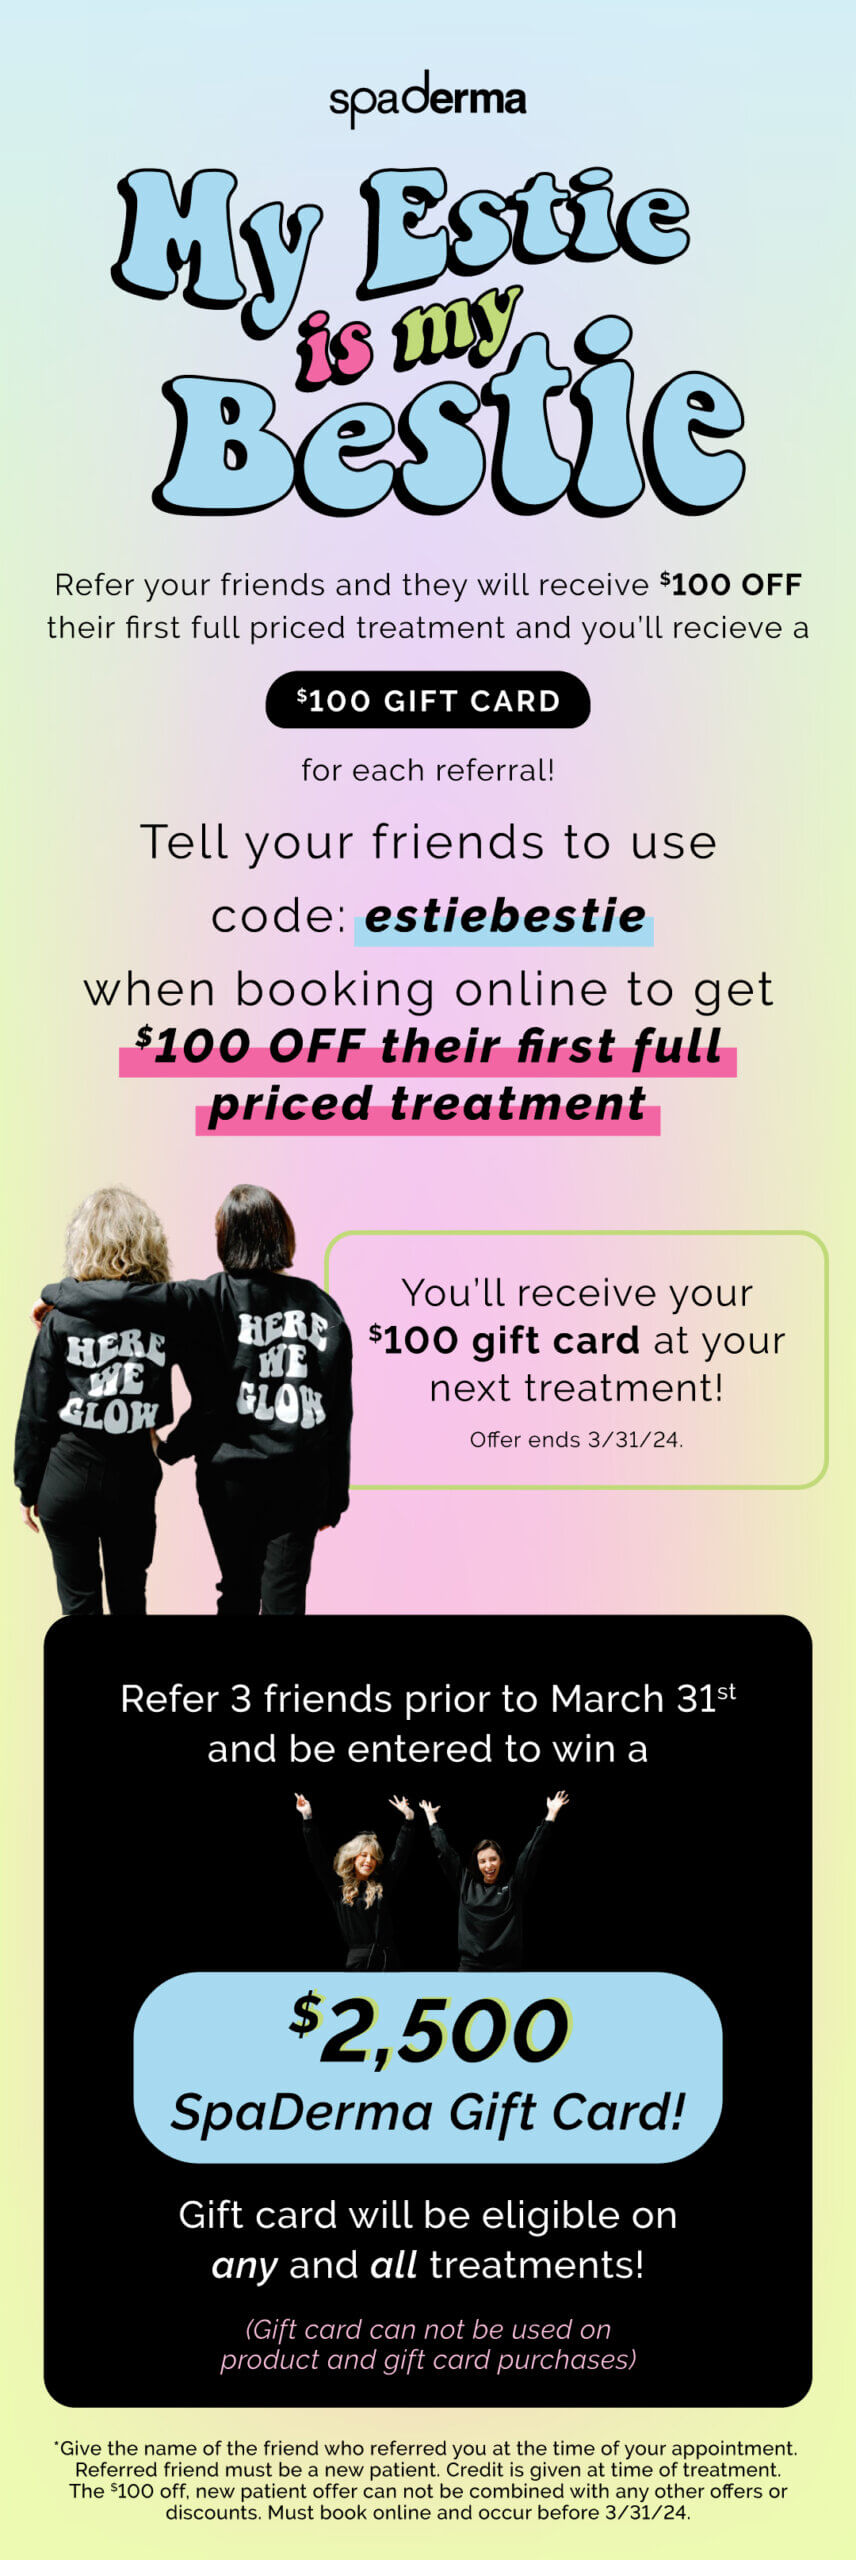 My estie is my bestie! Check out the new SpaDerma referral program. Refer a friend to receive $100 gift card at your next treatment and they will receive $100 off of their first full treatment! Refer 3 friends by March 31st and get entered for a chance to win a $2,500 gift card!